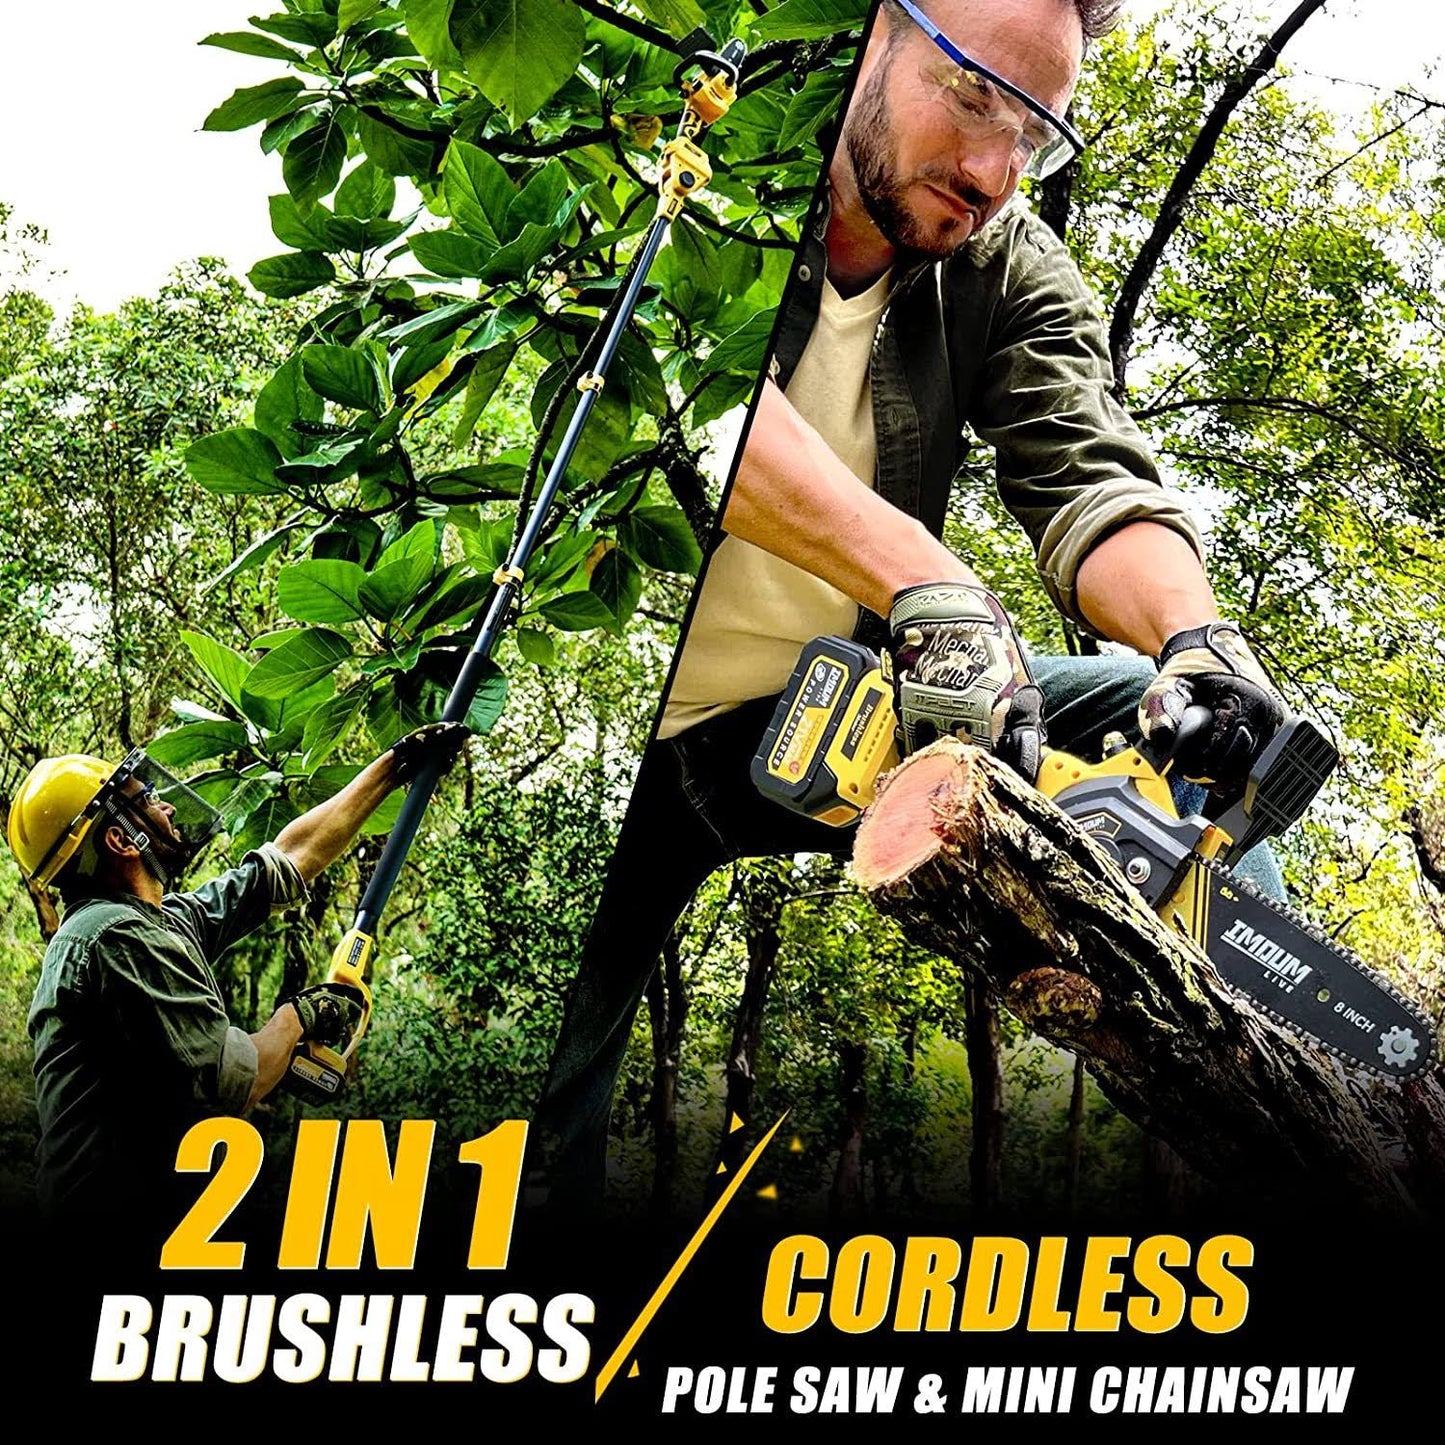 2-in-1 Brushless Pole Saw & Mini Chainsaw, IMOUMLIVE 8" Cutting Cordless Power Pole Saw for Wood Cutting, Trimming